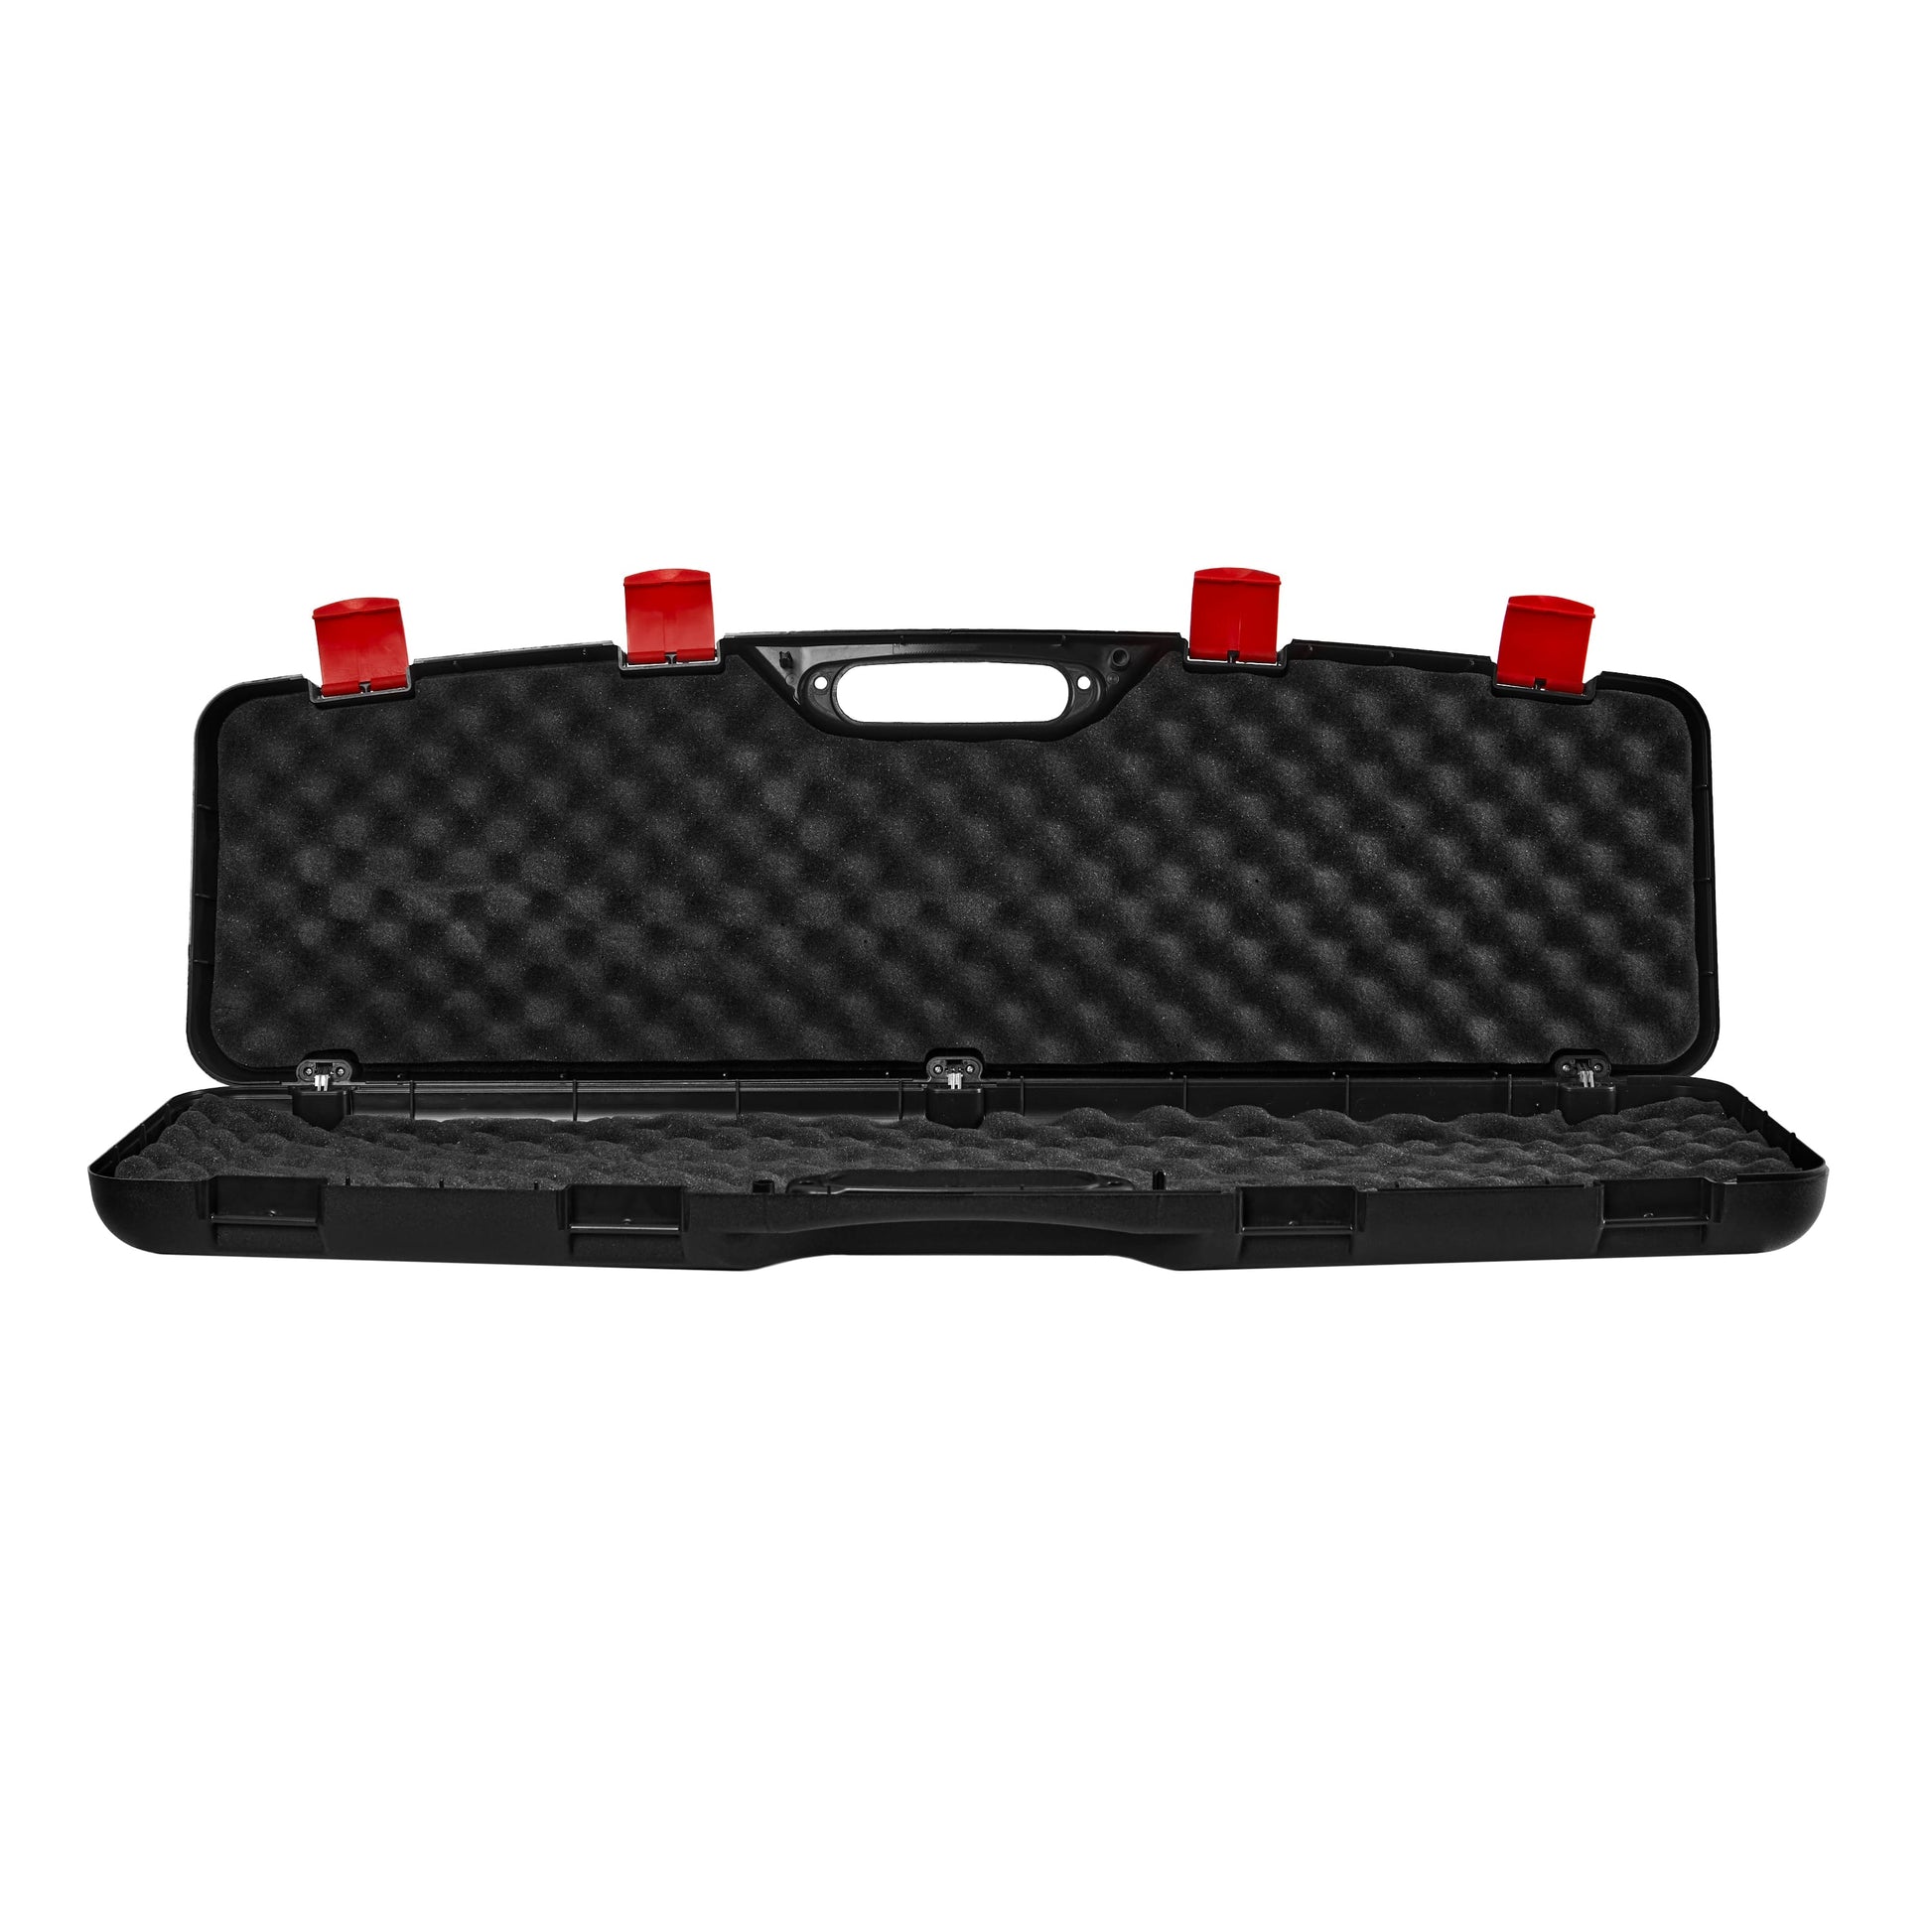 Black Open Air Rifle Carrying Case